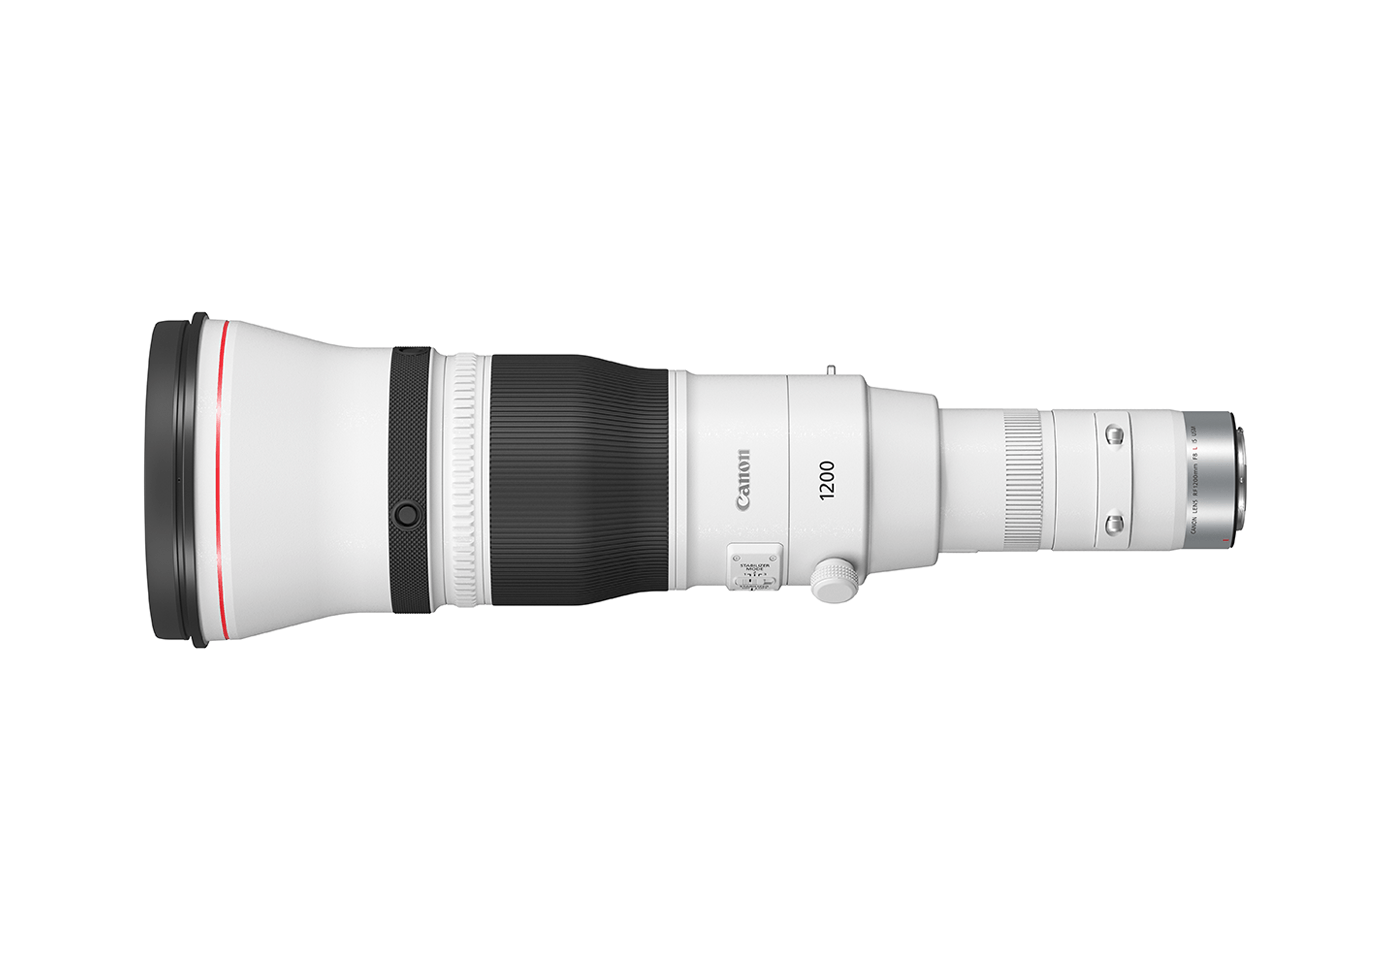 Product image of RF 1200mm f8L IS USM telephoto lens